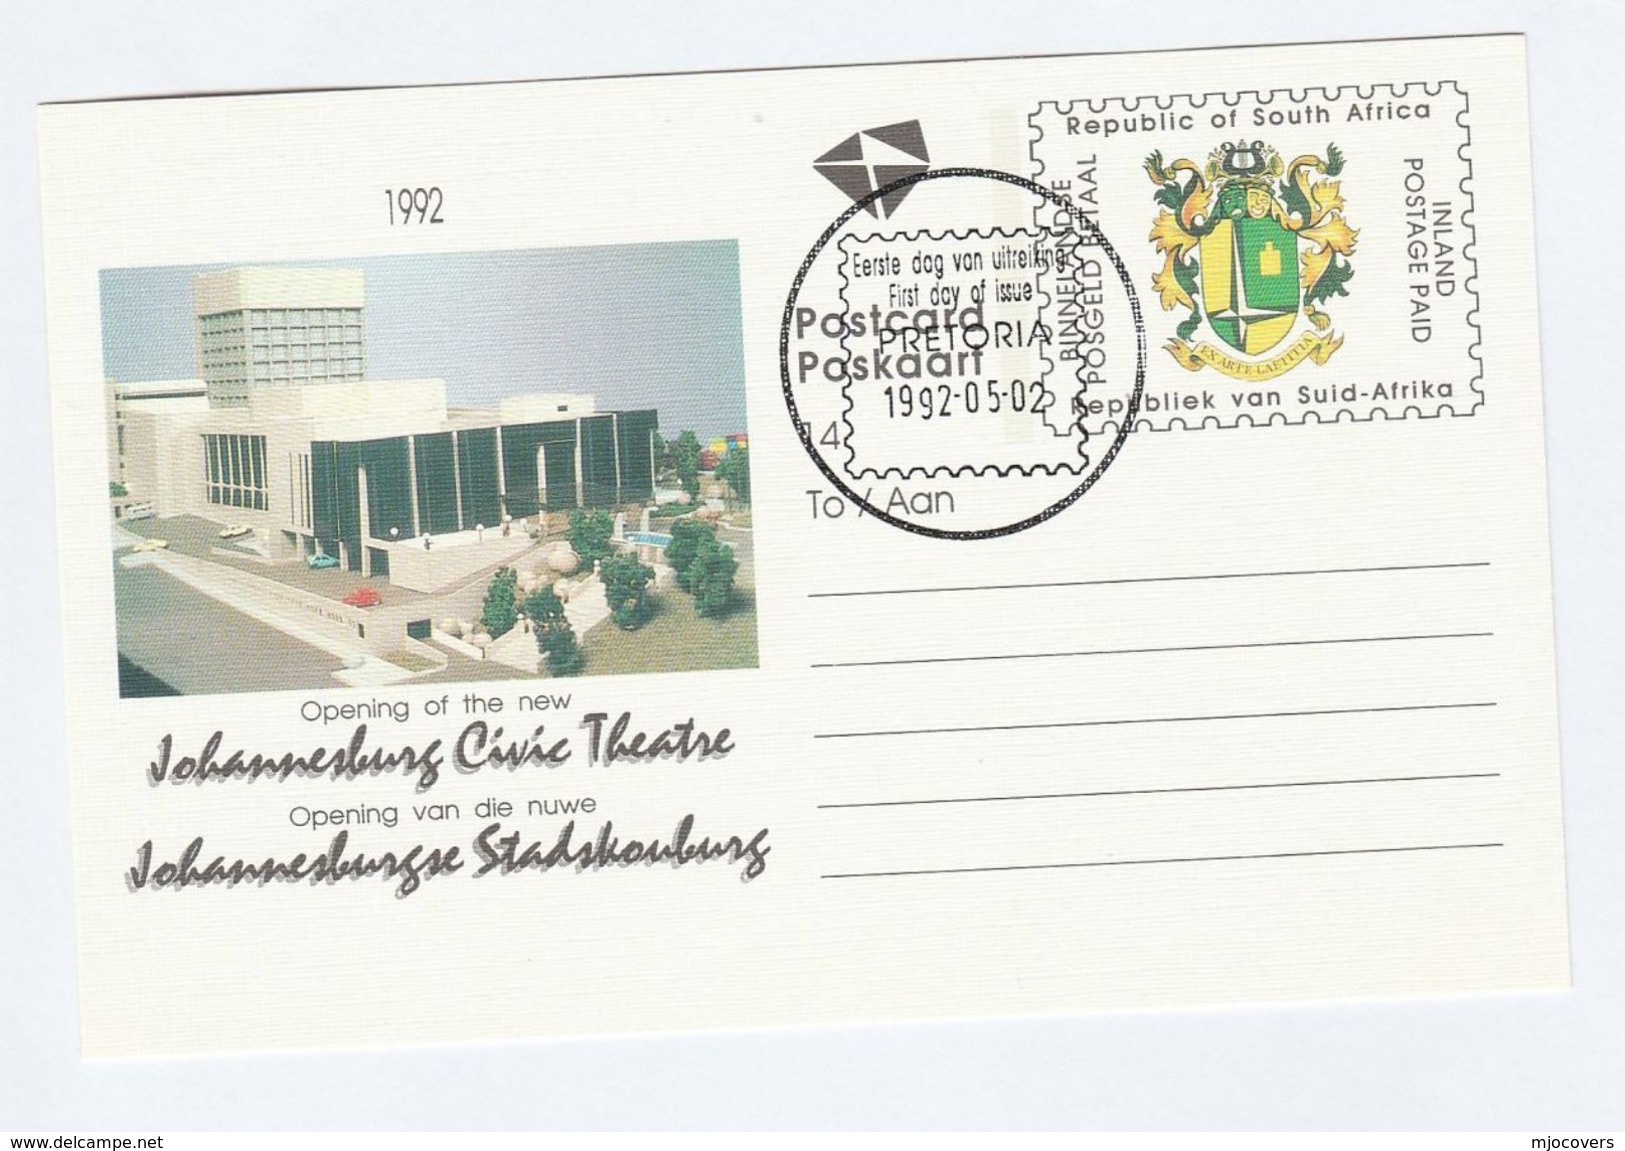 1992 SOUTH AFRICA STATIONERY Illus CIVIC THEATRE At JOHANNESBURG , FIRST DAY Rsa Stamps Postal Card Cover - Covers & Documents